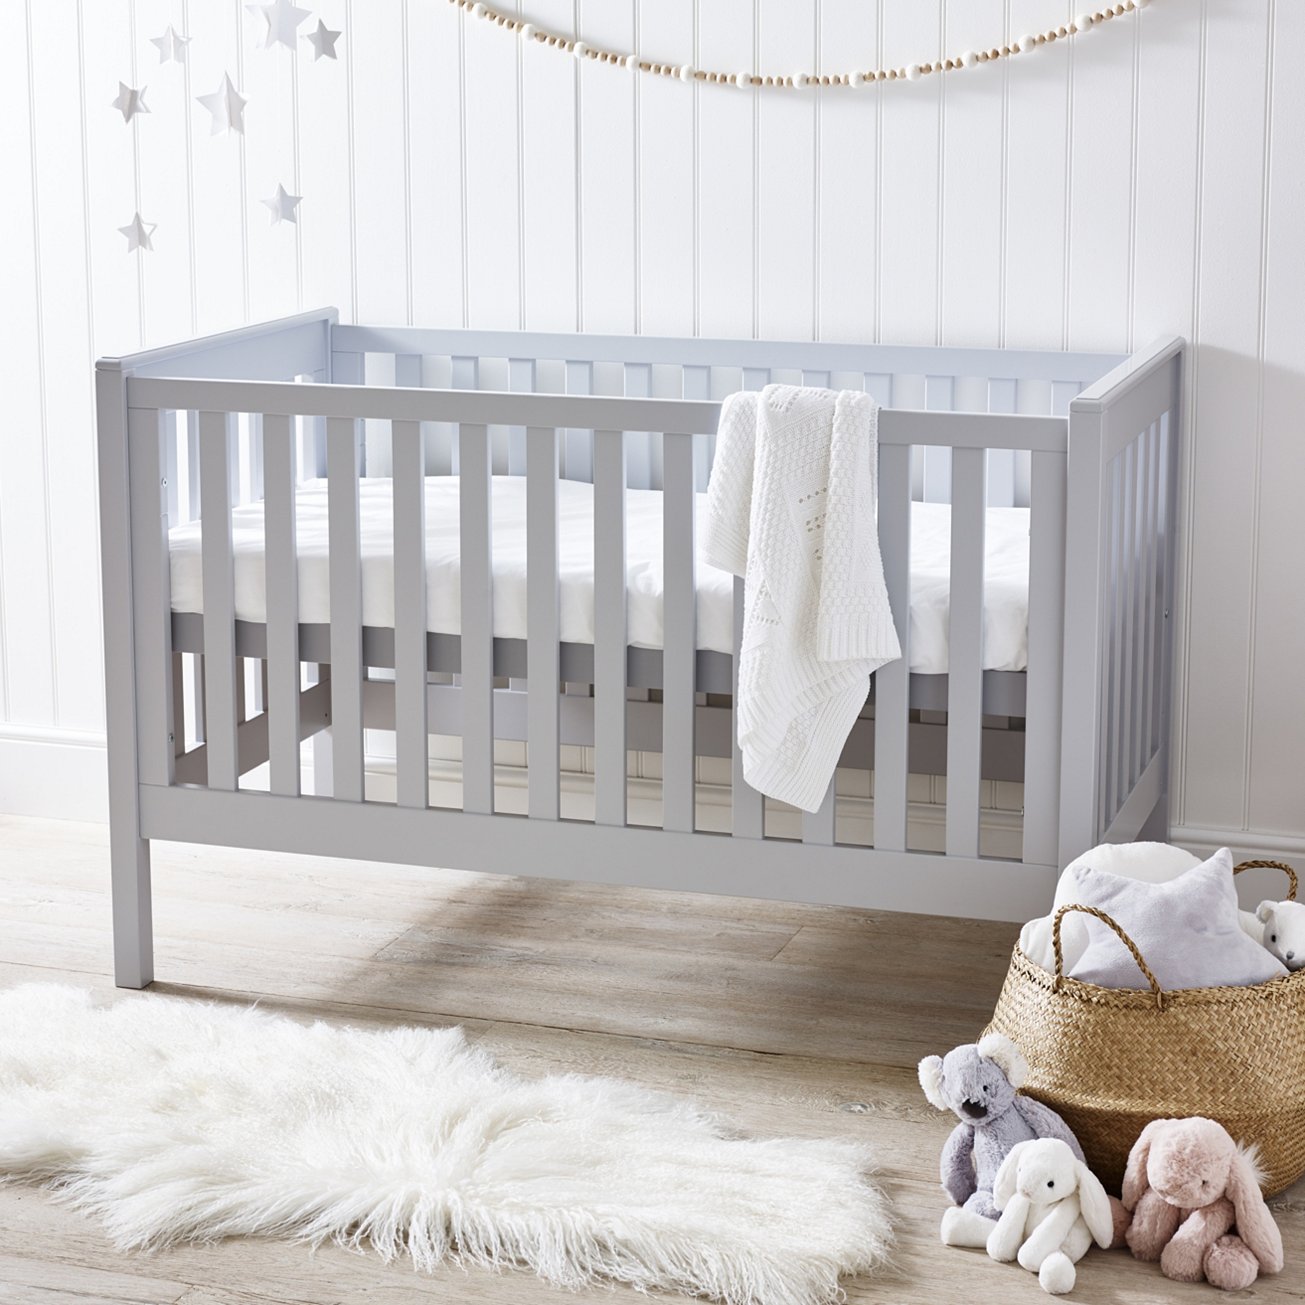 The rich birch bed is the only early years bed that you will need. When you baby is small the cot will house them with ease. As they start to get older the cot can then be converted into a junior bed and the mattress can be lowered. This means that you do not need to fork out on another bed in their first few years. - £425. 00